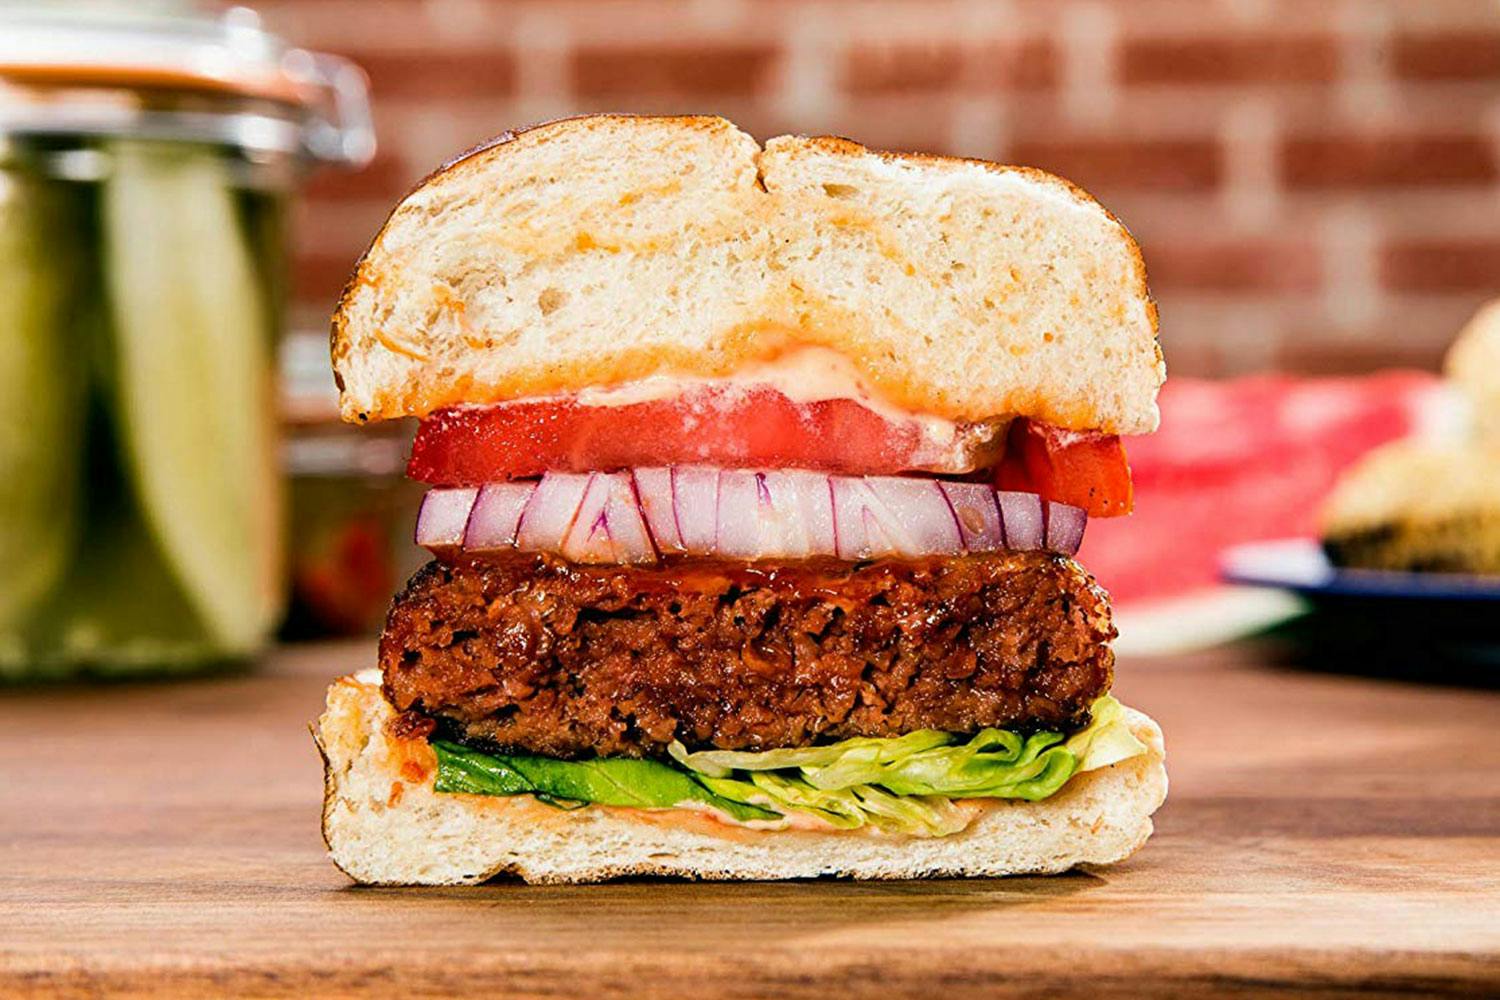 A burger made with a Beyond Meat plant-based patty cut in half to show a cross section with tomato, onion, and lettuce.